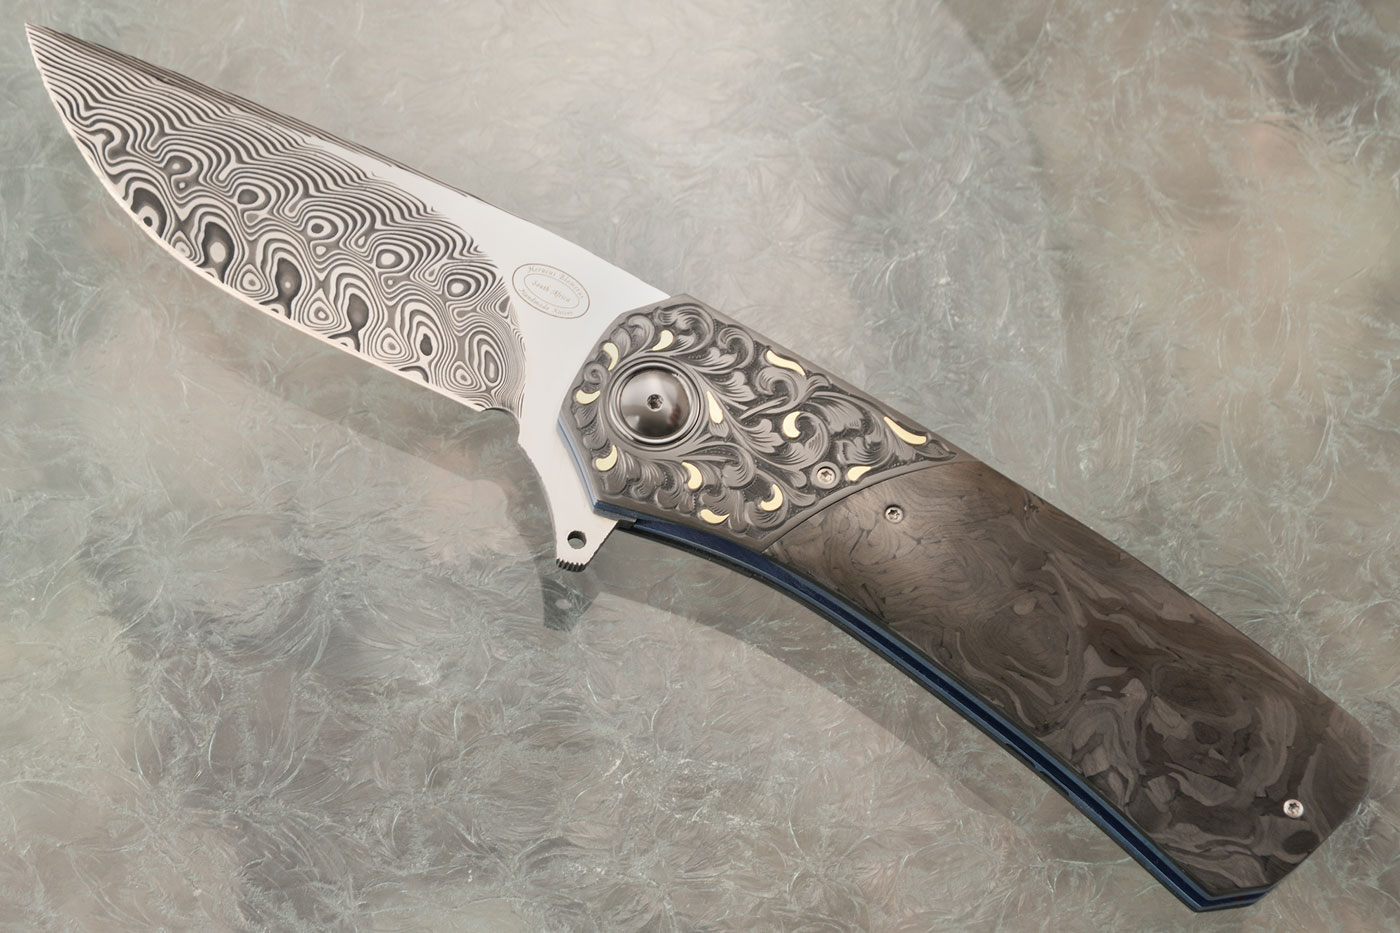 LL15 Flipper with Damascus, Engraved Zirconium, Gold Inlay, and Marble Carbon Fiber